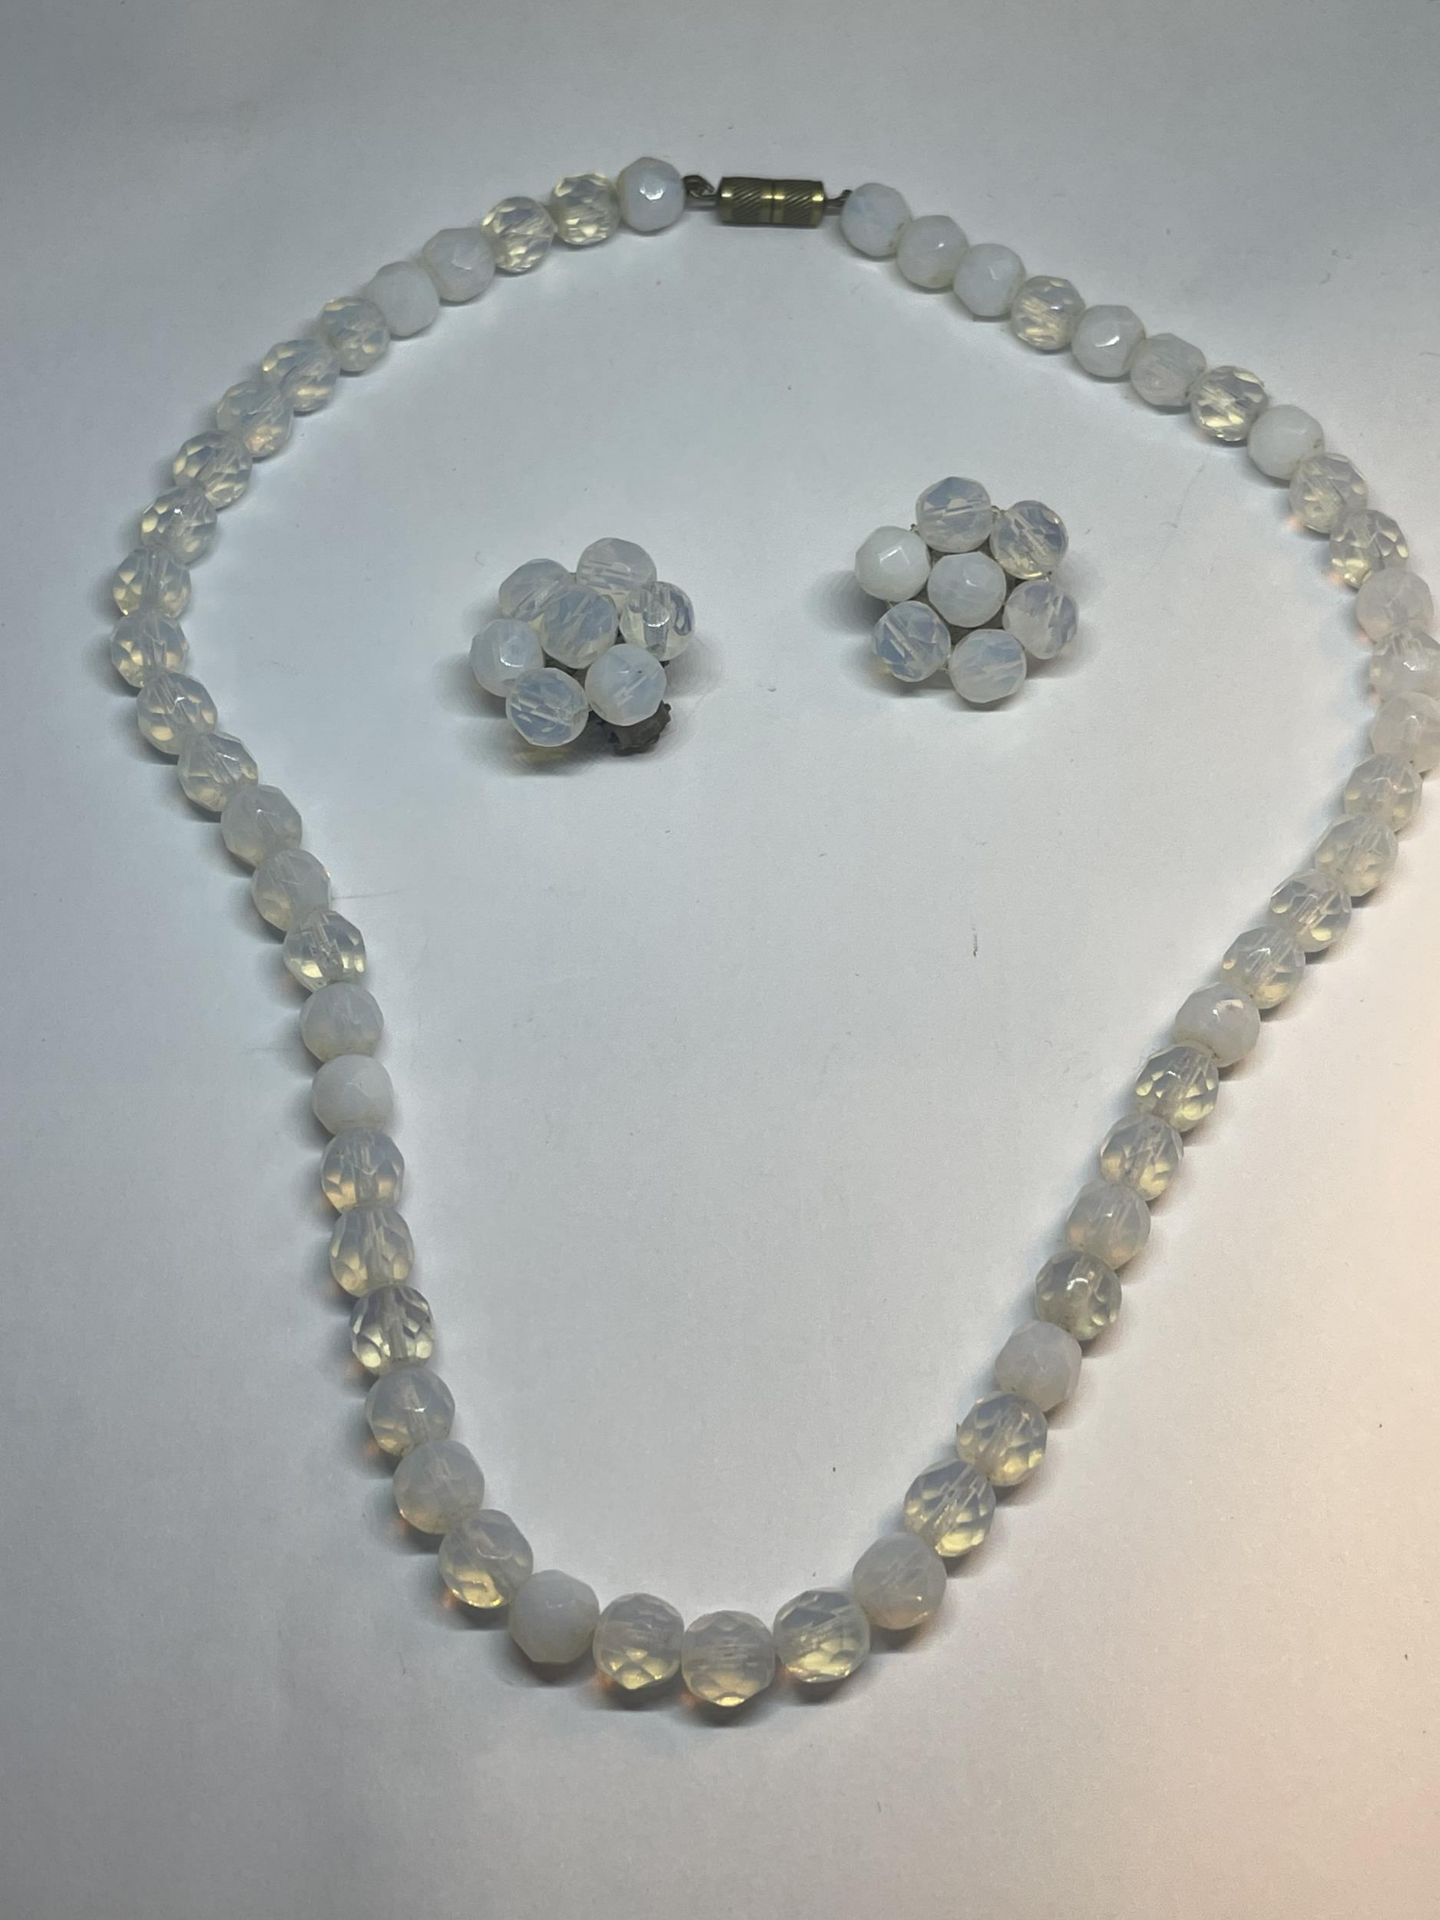 A VINTAGE NECKLACE AND EARRINGS SET MADE OF TRUE OPALESCENT GLASS WITH A PRESENTATION BOX